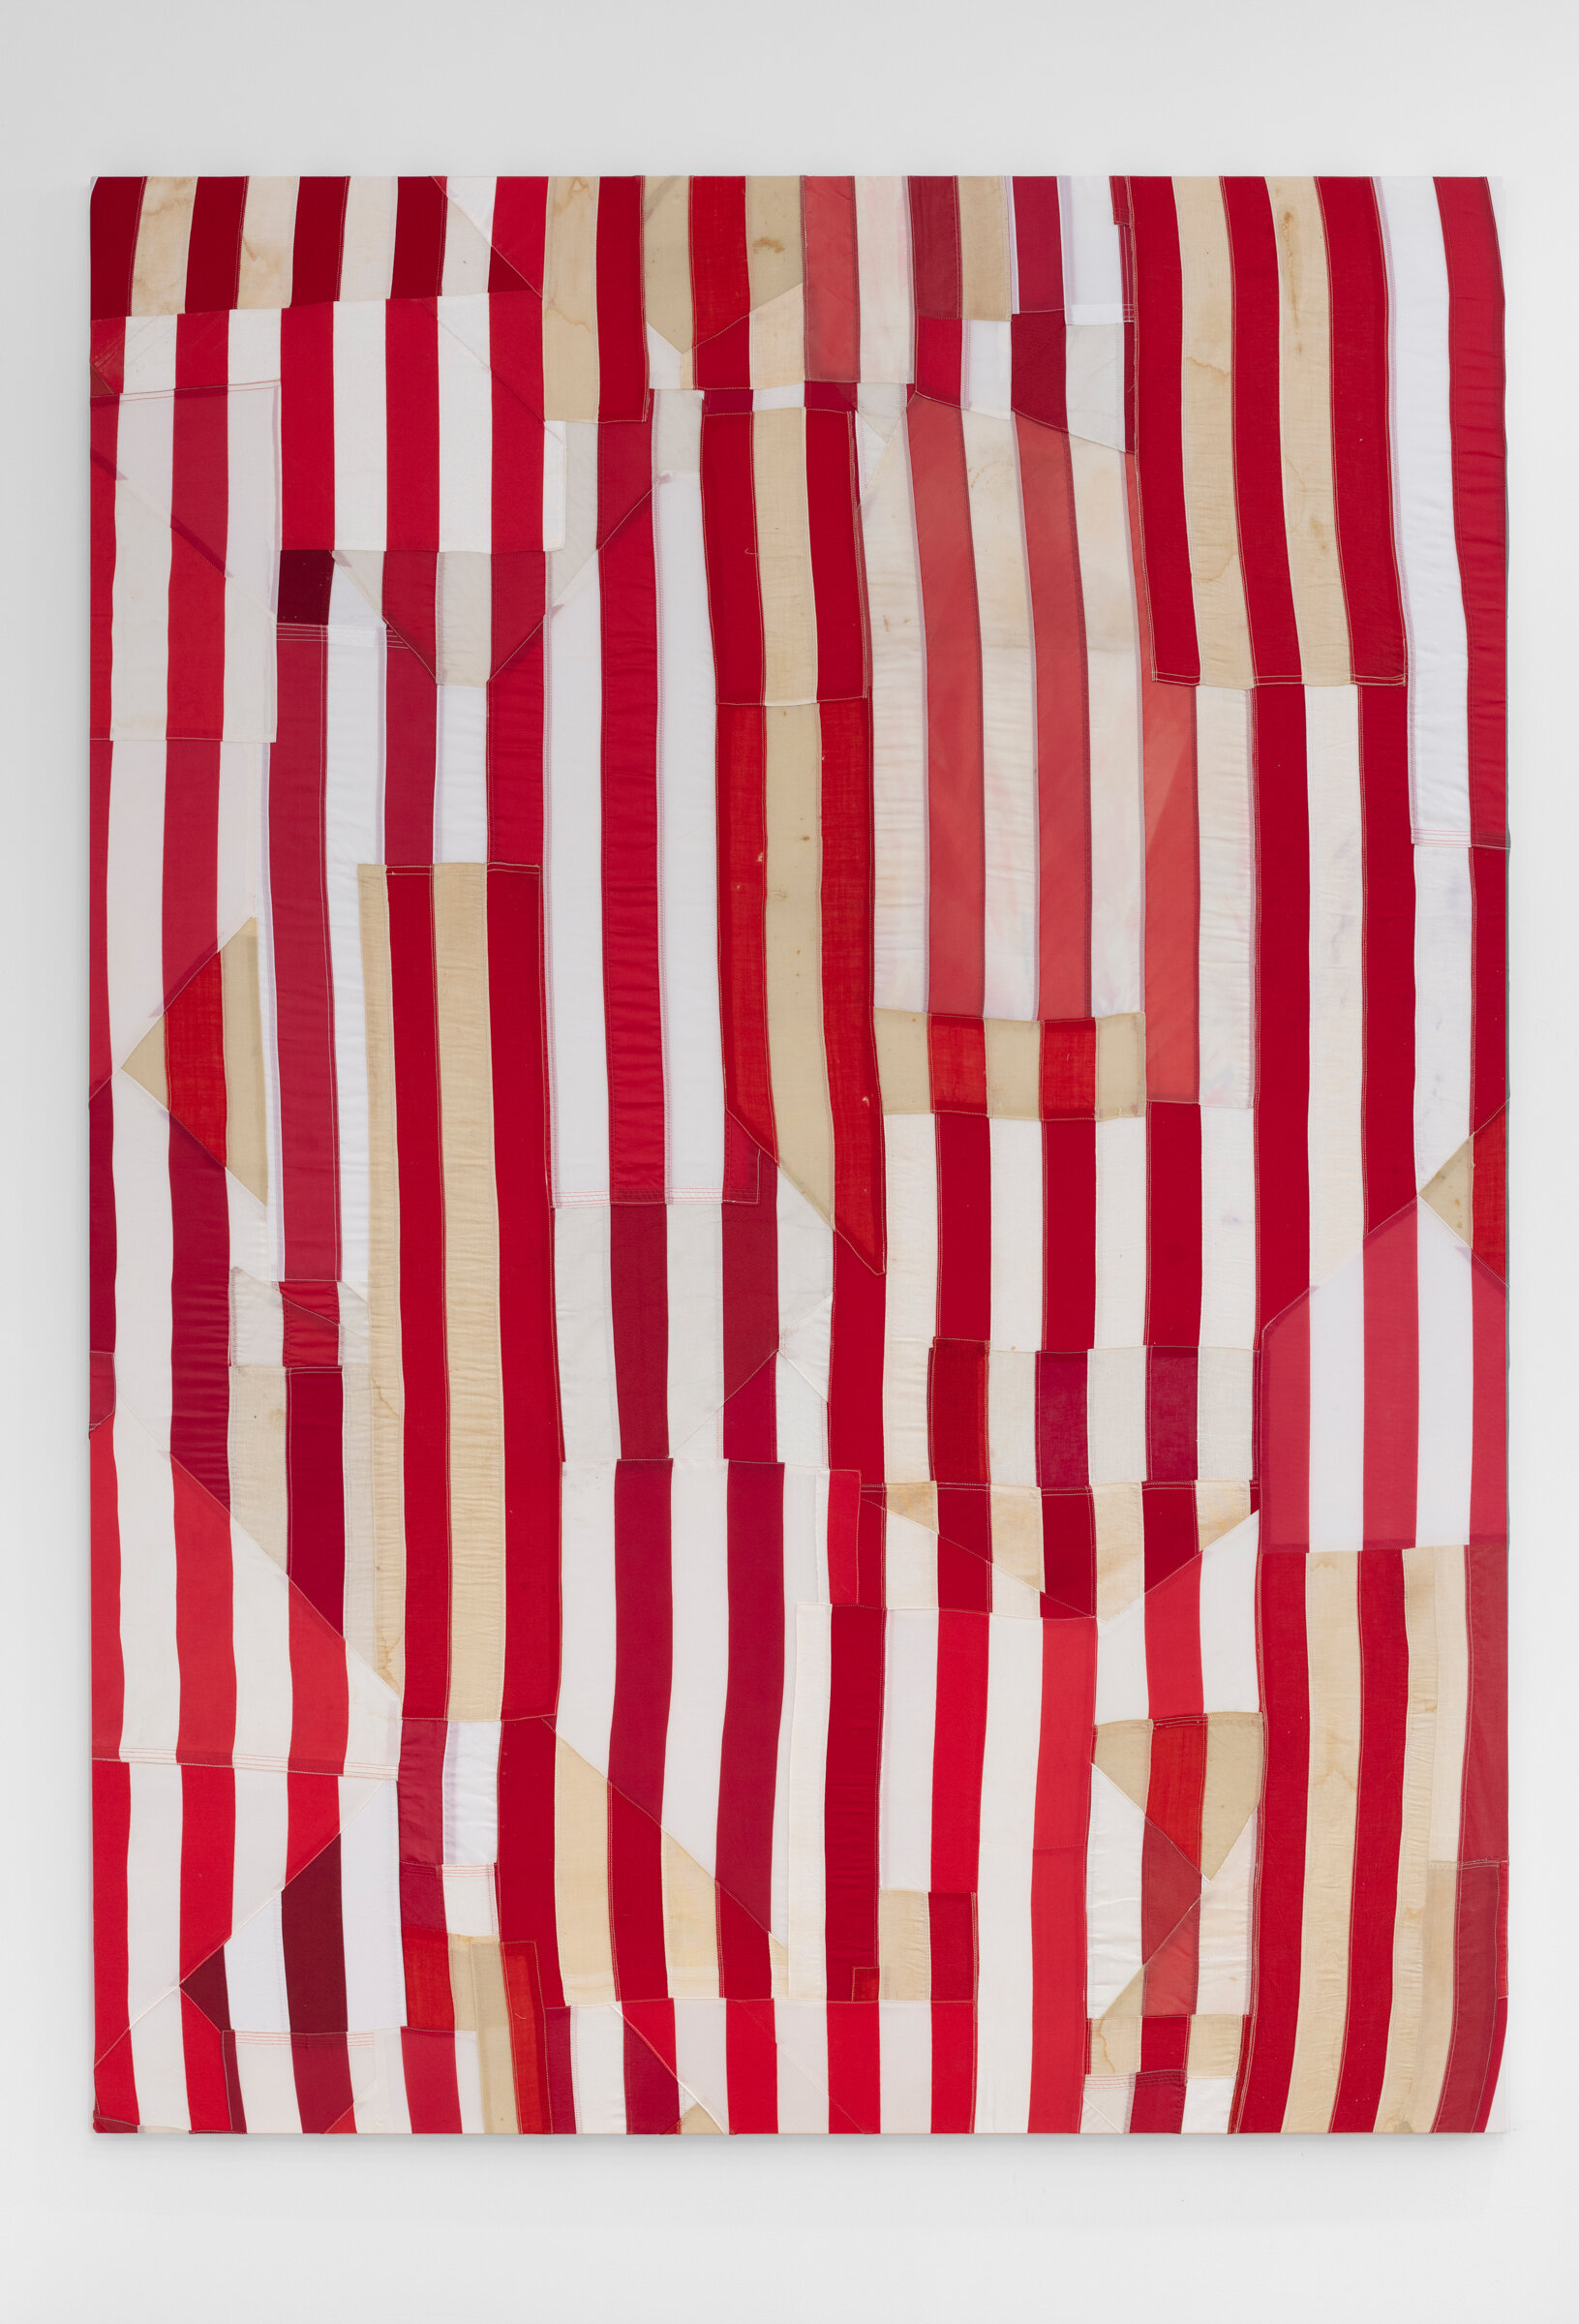 Hank Willis Thomas. “14 Red Bars” (2020). Mixed media quilt including American flags. 97” x 69.5”. Courtesy Hank Willis Thomas and Jack Shainman Gallery.